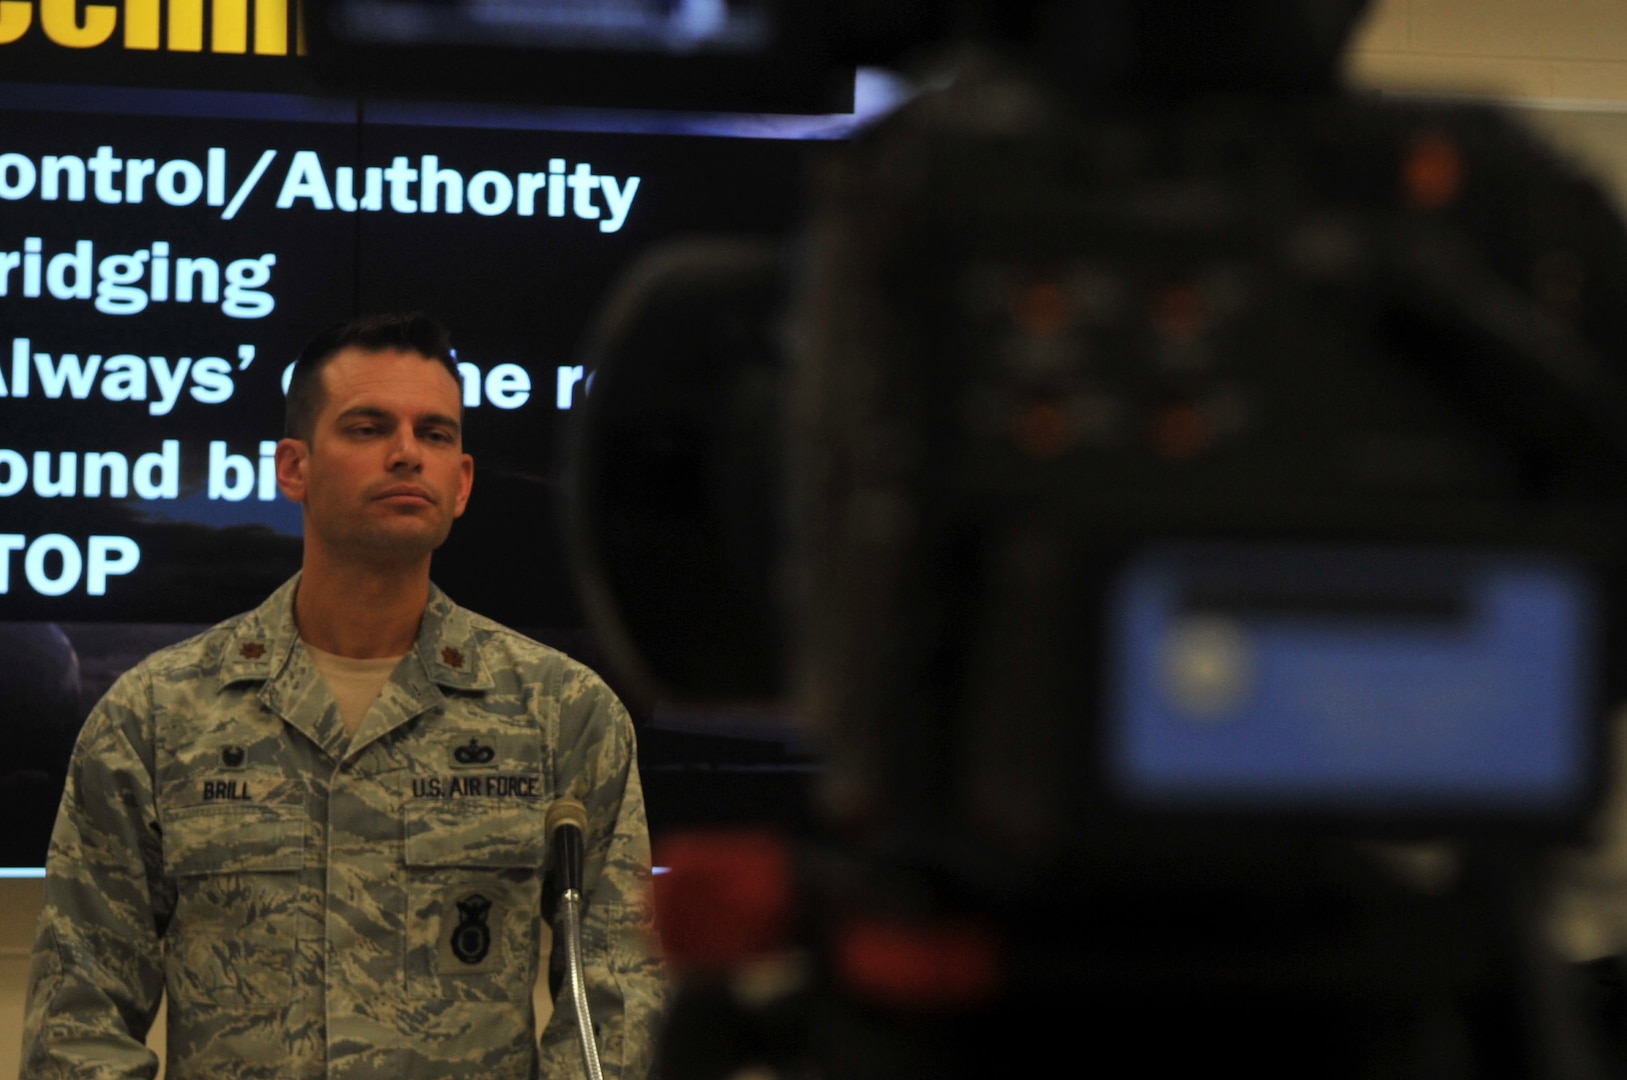 Maj. Matthew Brill, 460th Security Forces Squadron commander, volunteers to speak to the media in a simulated press conference during the Emergency Operations Center Director Course Aug. 4, 2016 at Buckley Air Force Base, Colo. The 460th Space Wing Public Affairs briefed students ont he importance of releasing accurate information regarding an incident to the public in a timely manner. (U.S. Air Force photo by Airman Holden S. Faul/ Released)